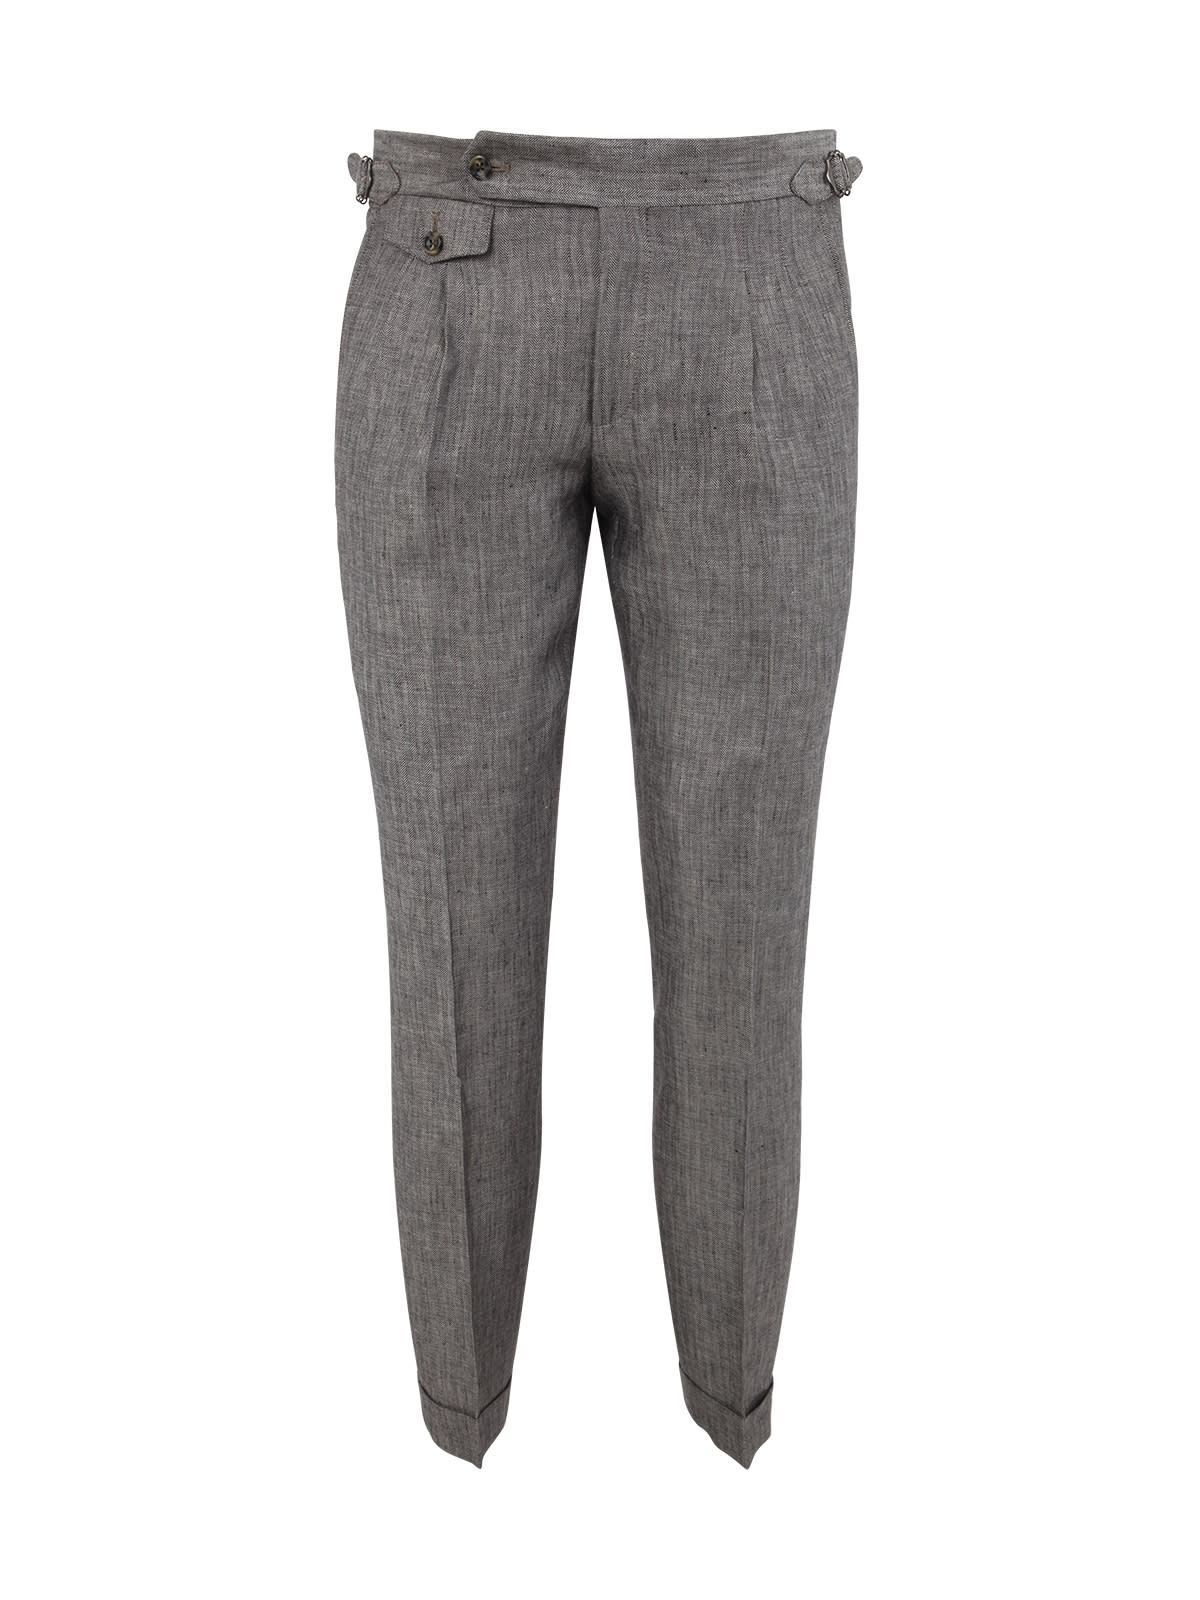 BARBA NAPOLI PARMA TROUSERS WITH TWO PENCES